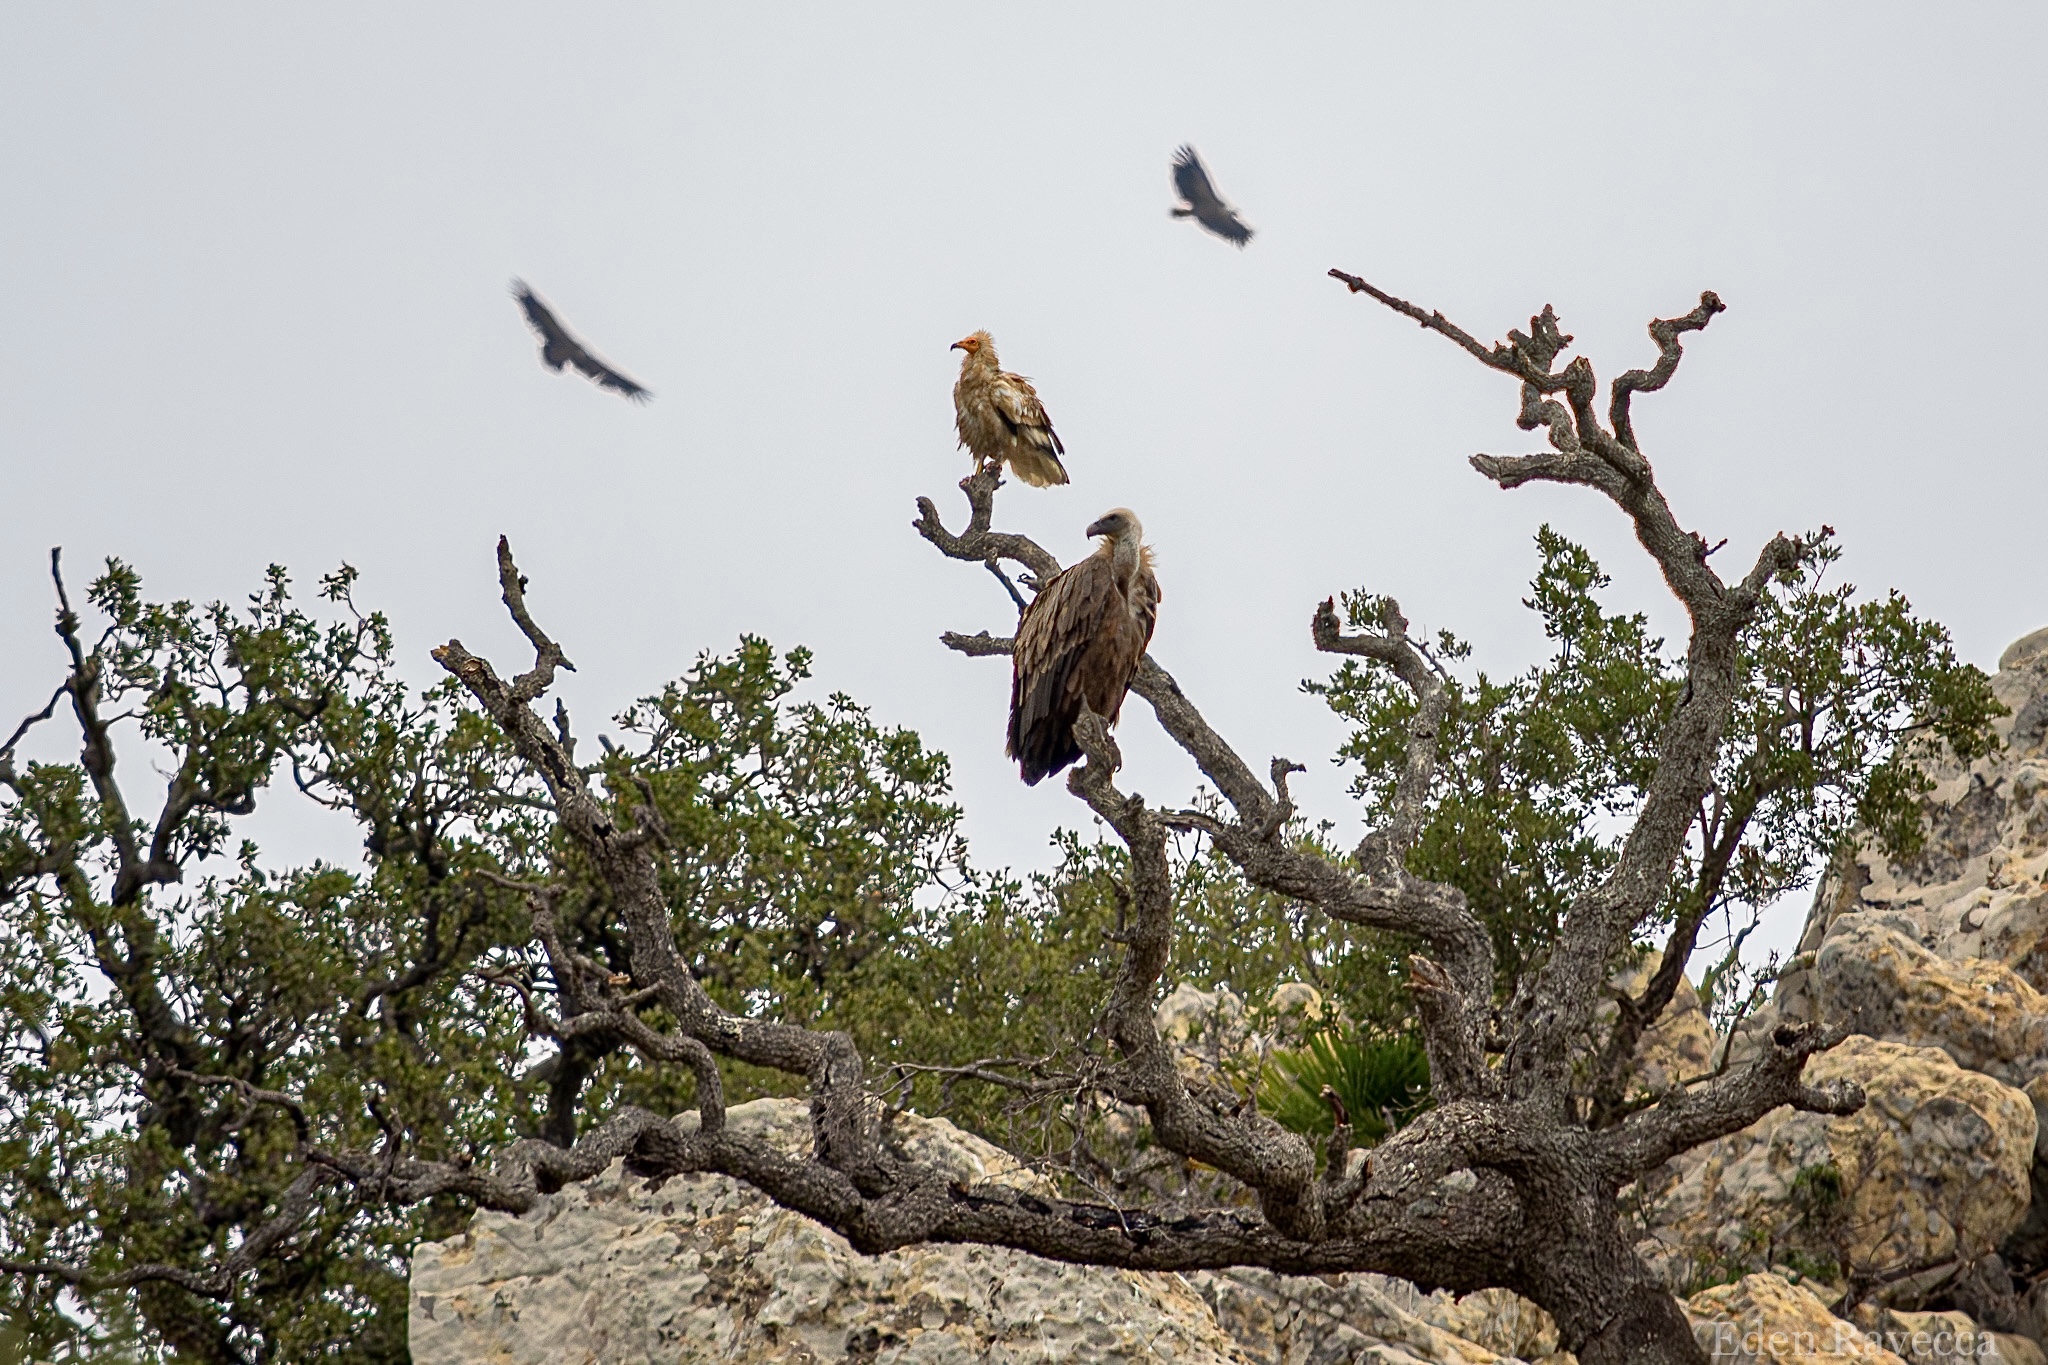 a small white vulture with dainty yellow face, and a larger bulky brown vulture sit together in a gnarled bare tree. Behind them two other large vultures are soaring in the blurred background